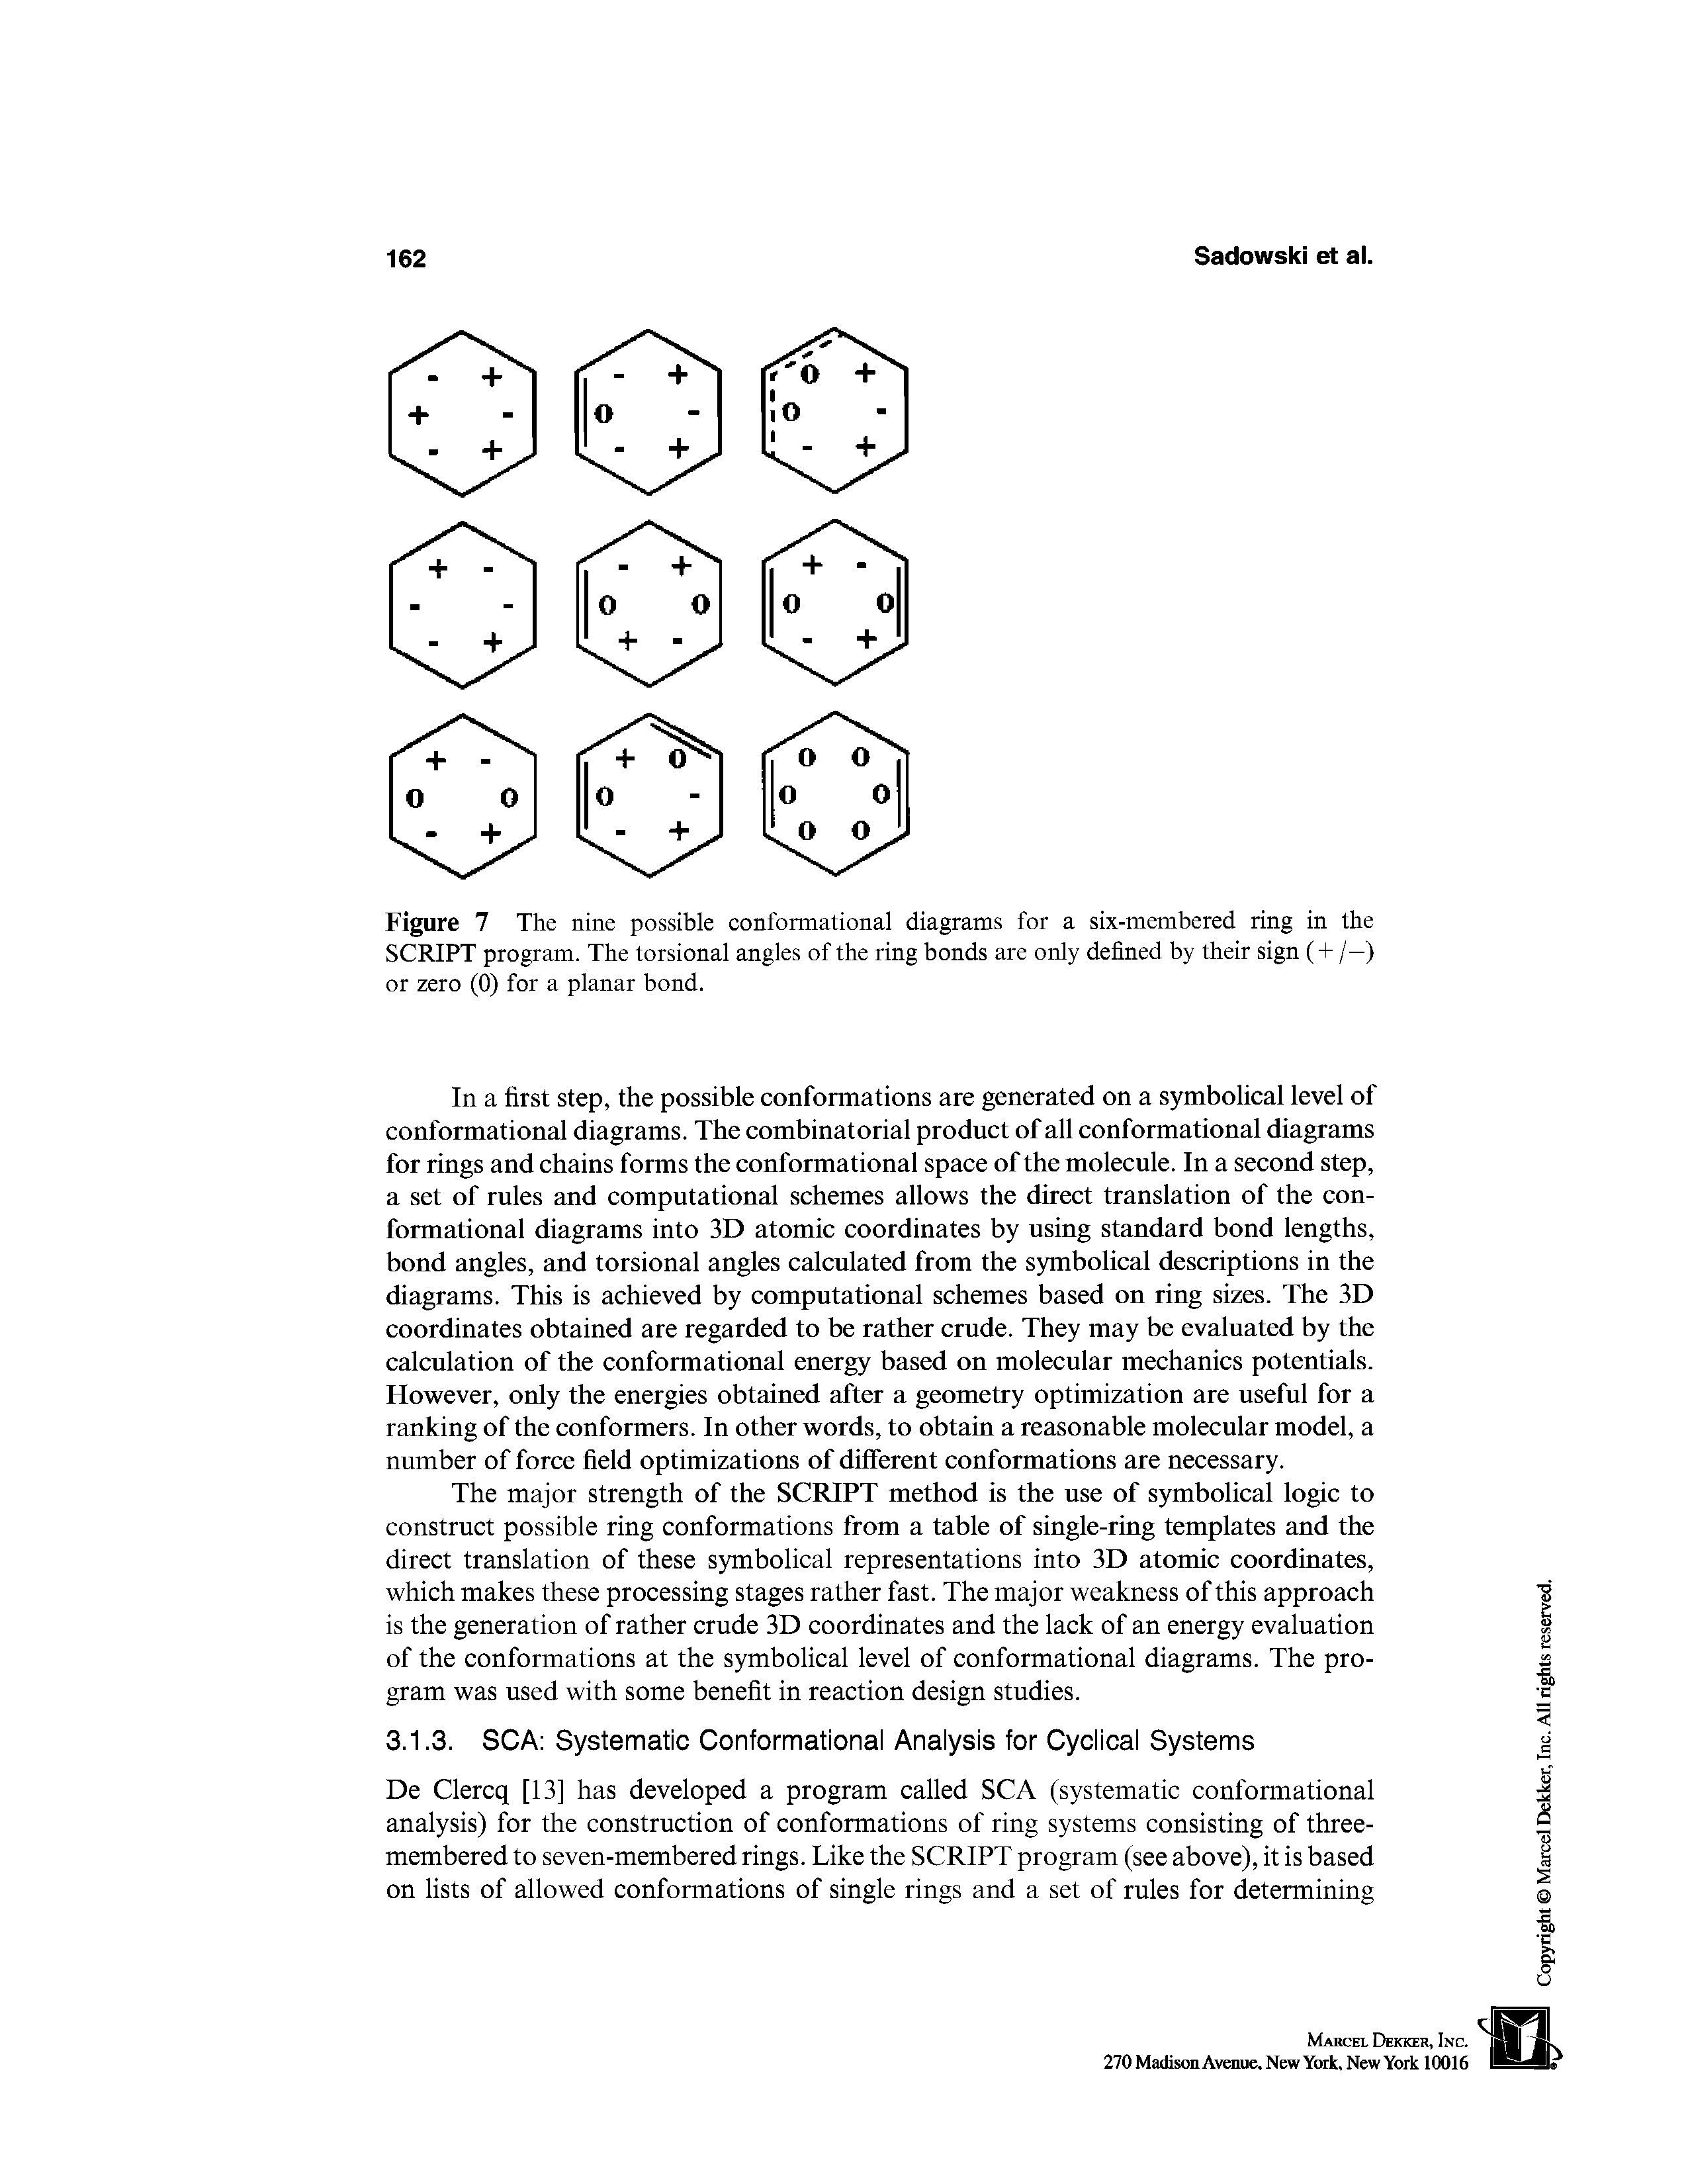 Figure 7 The nine possible conformational diagrams for a six-membered ring in the SCRIPT program. The torsional angles of the ring bonds are only defined by their sign ( + /—) or zero (0) for a planar bond.